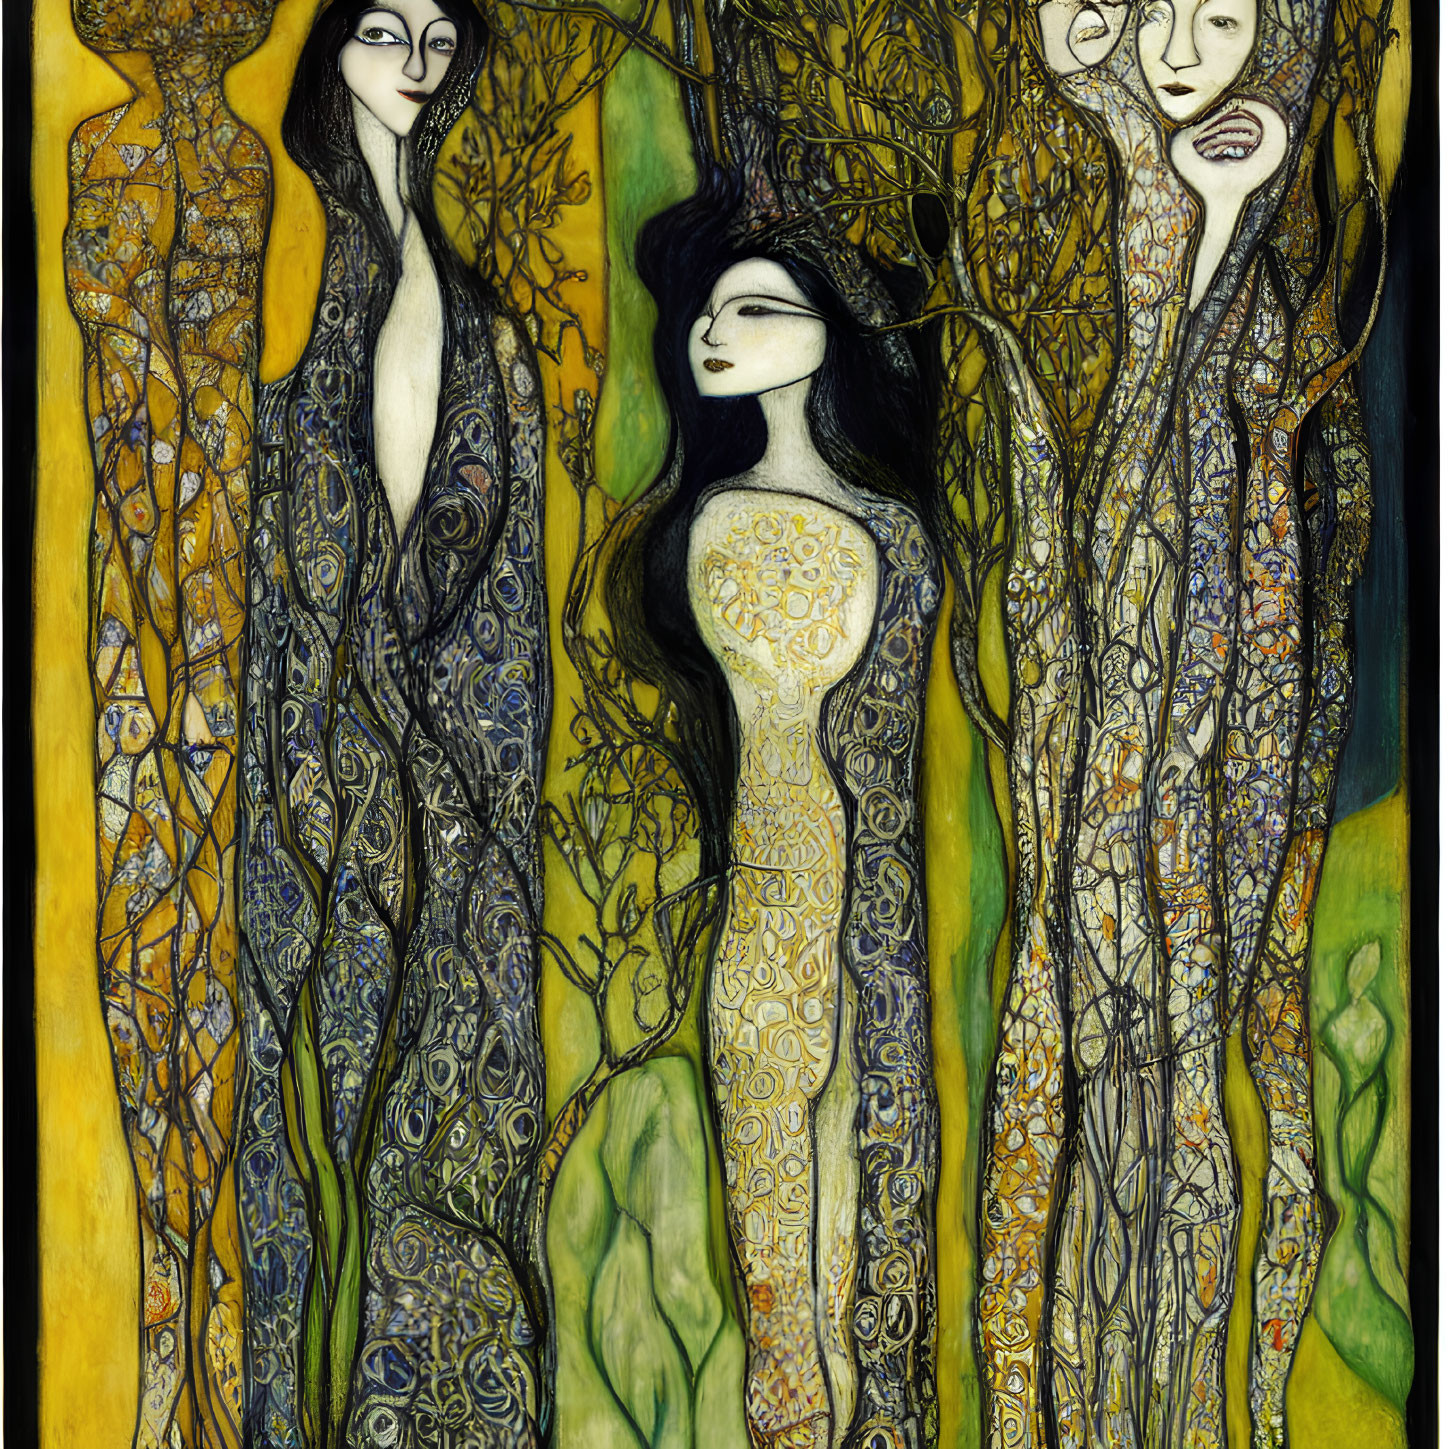 Elongated Female Figures in Art Nouveau Style Painting